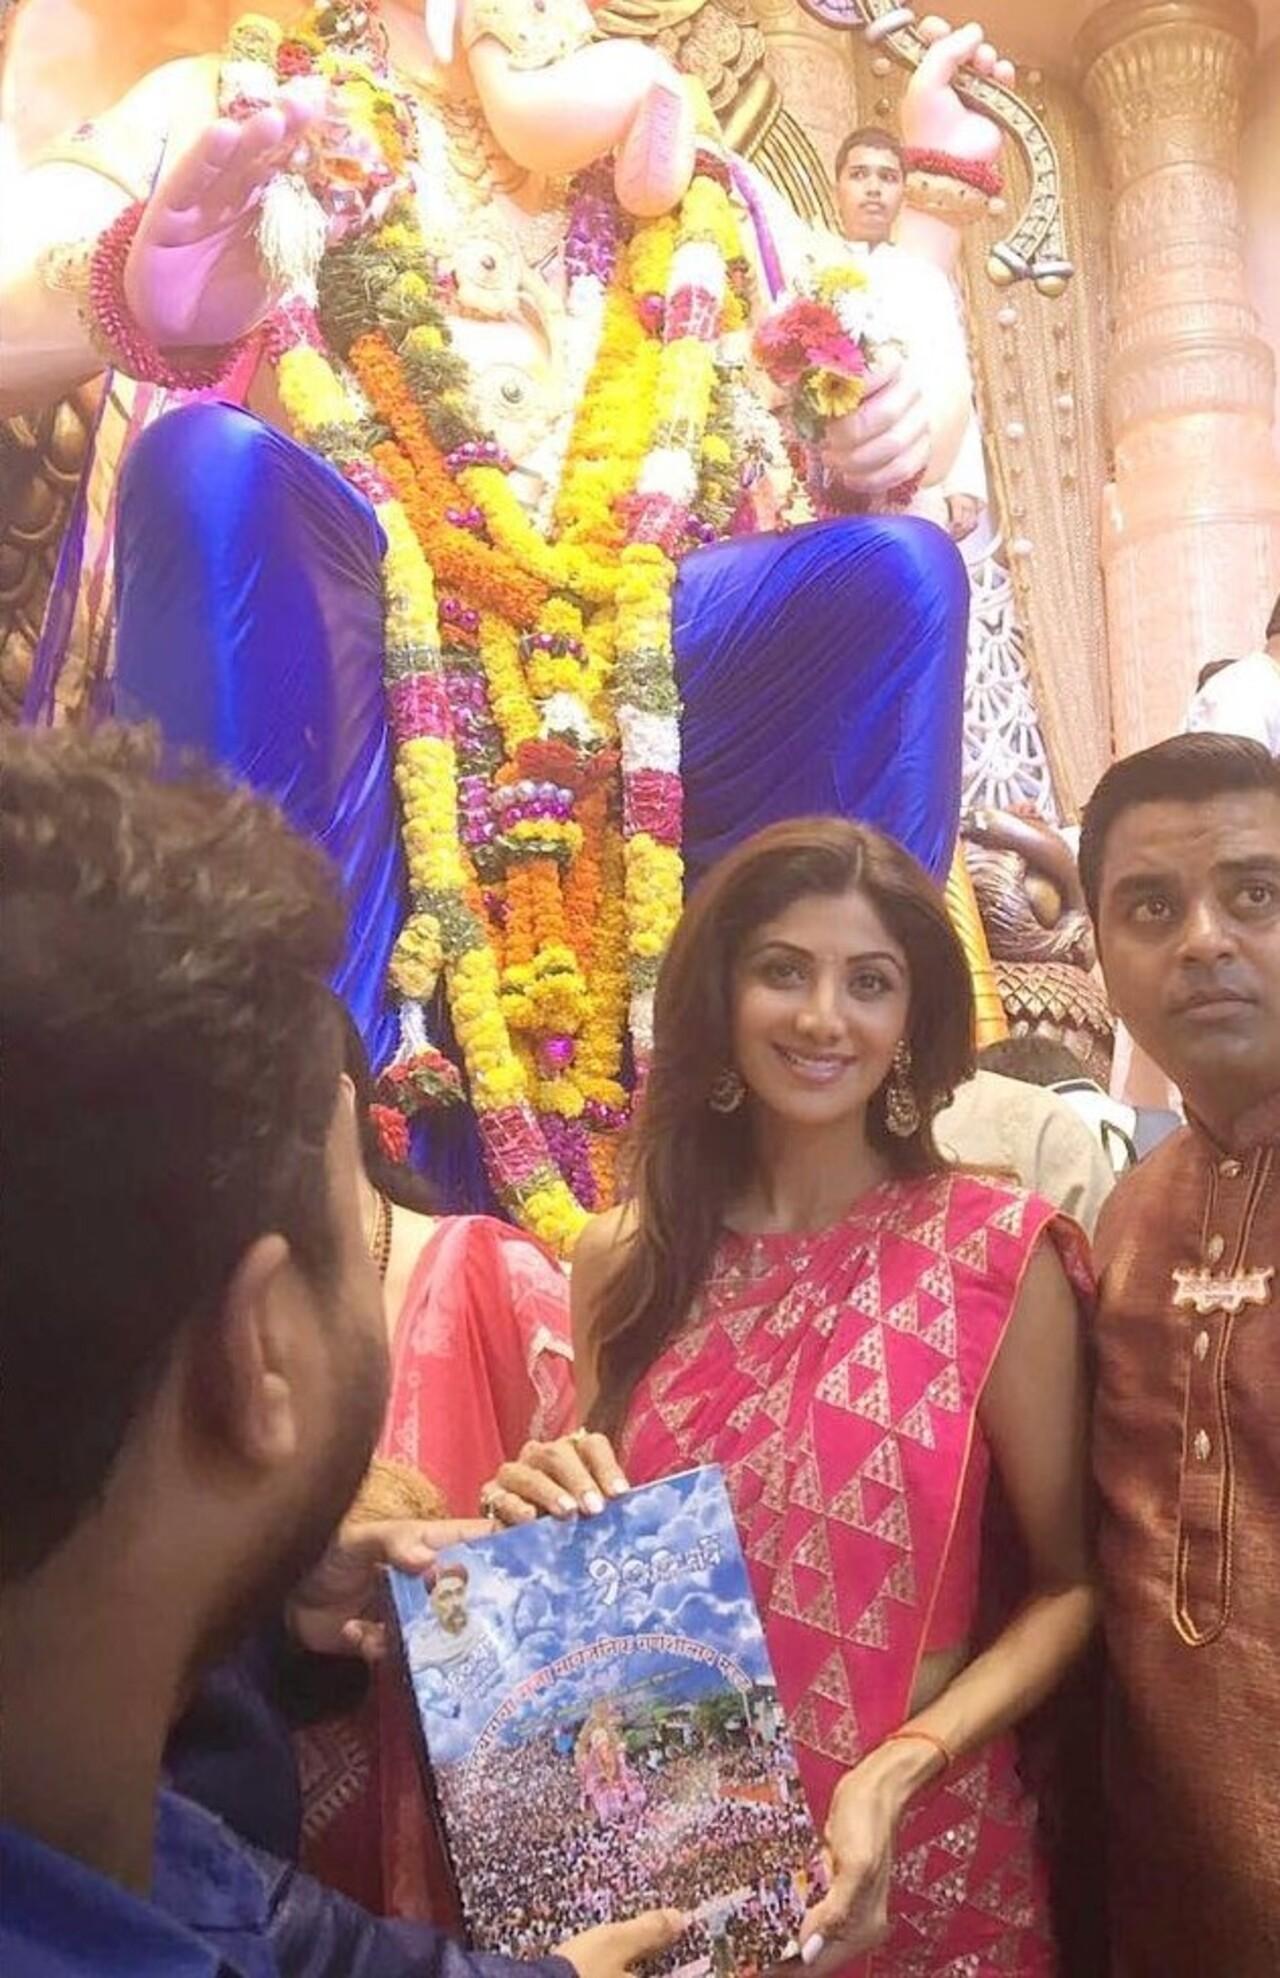 Shilpa Shetty is one of the Ganesh devotees who seek blessings of the God at Lalbaugcha Raja. She has been visiting the pandal with her mother and other family members